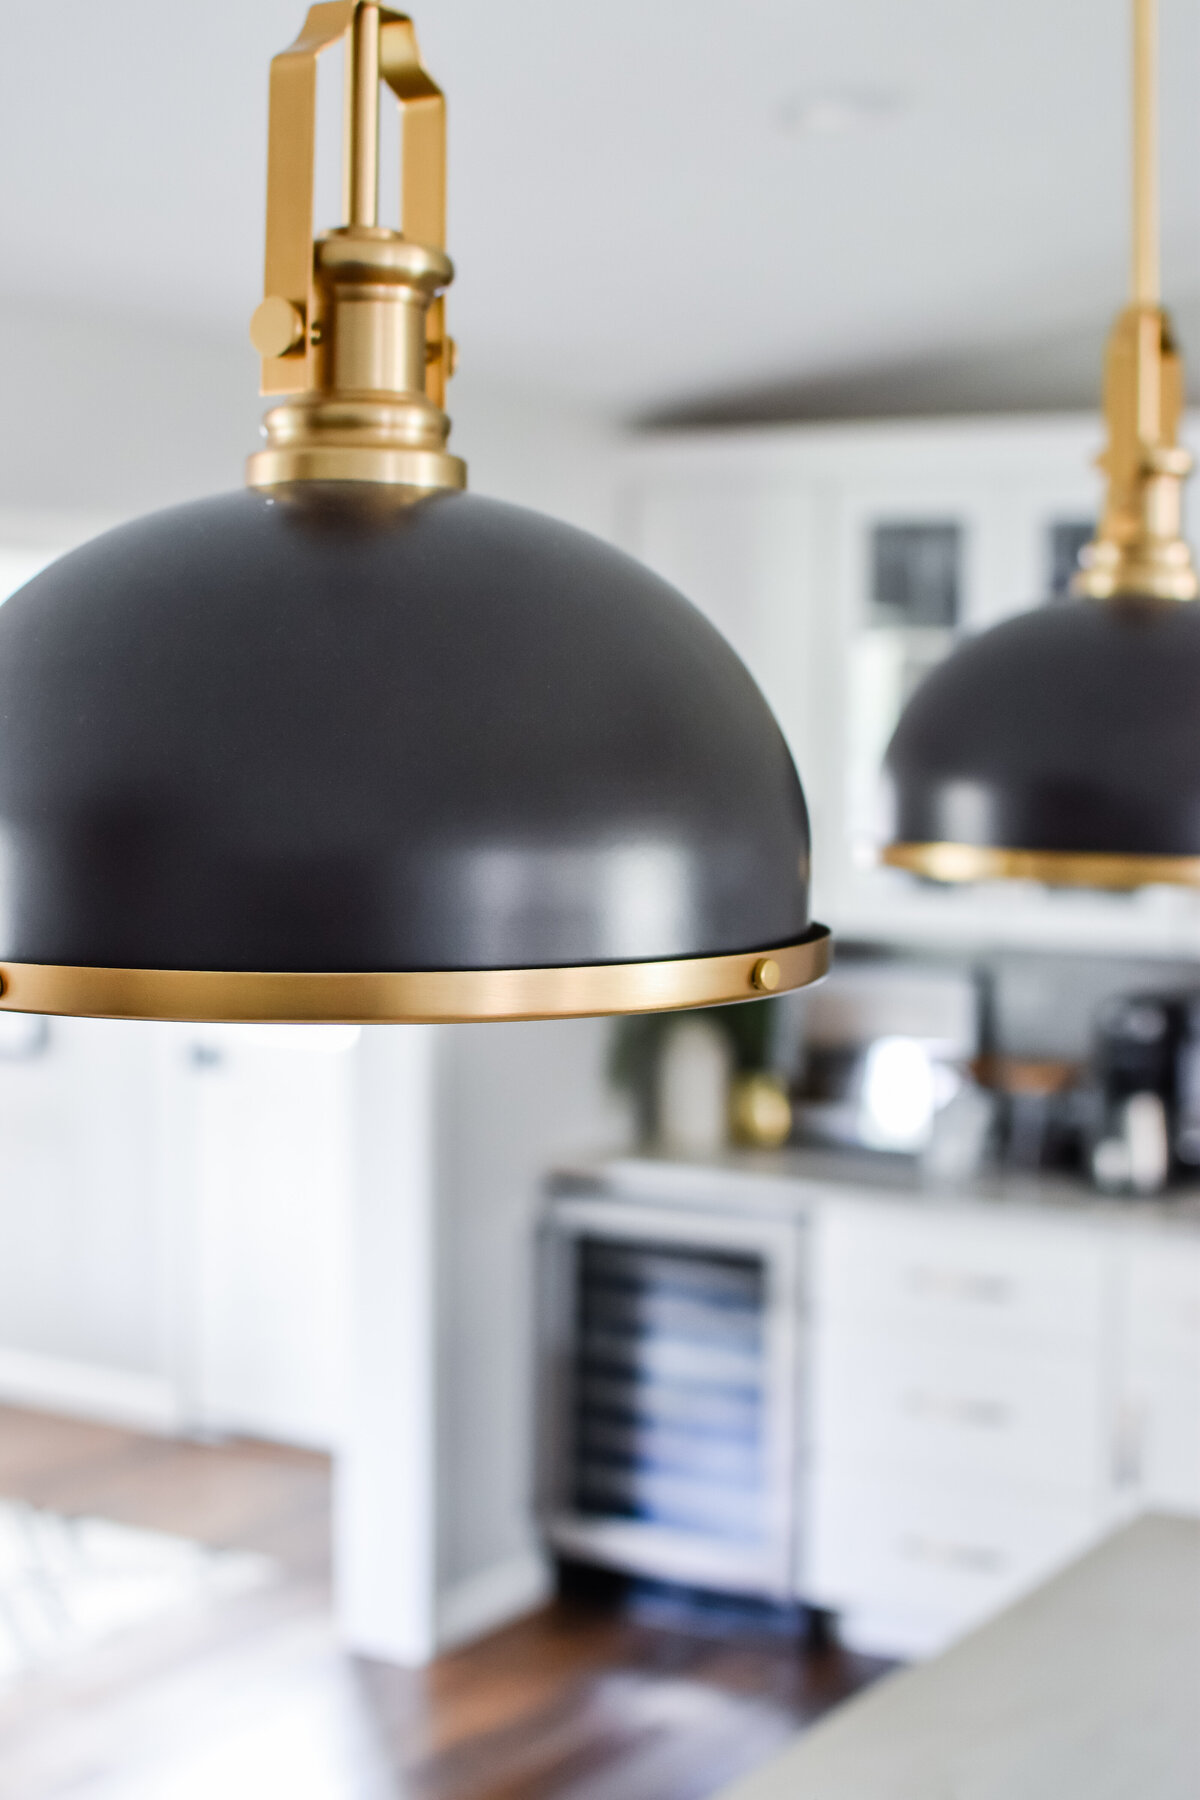 Two black metal pendant lights hang over a white kitchen island